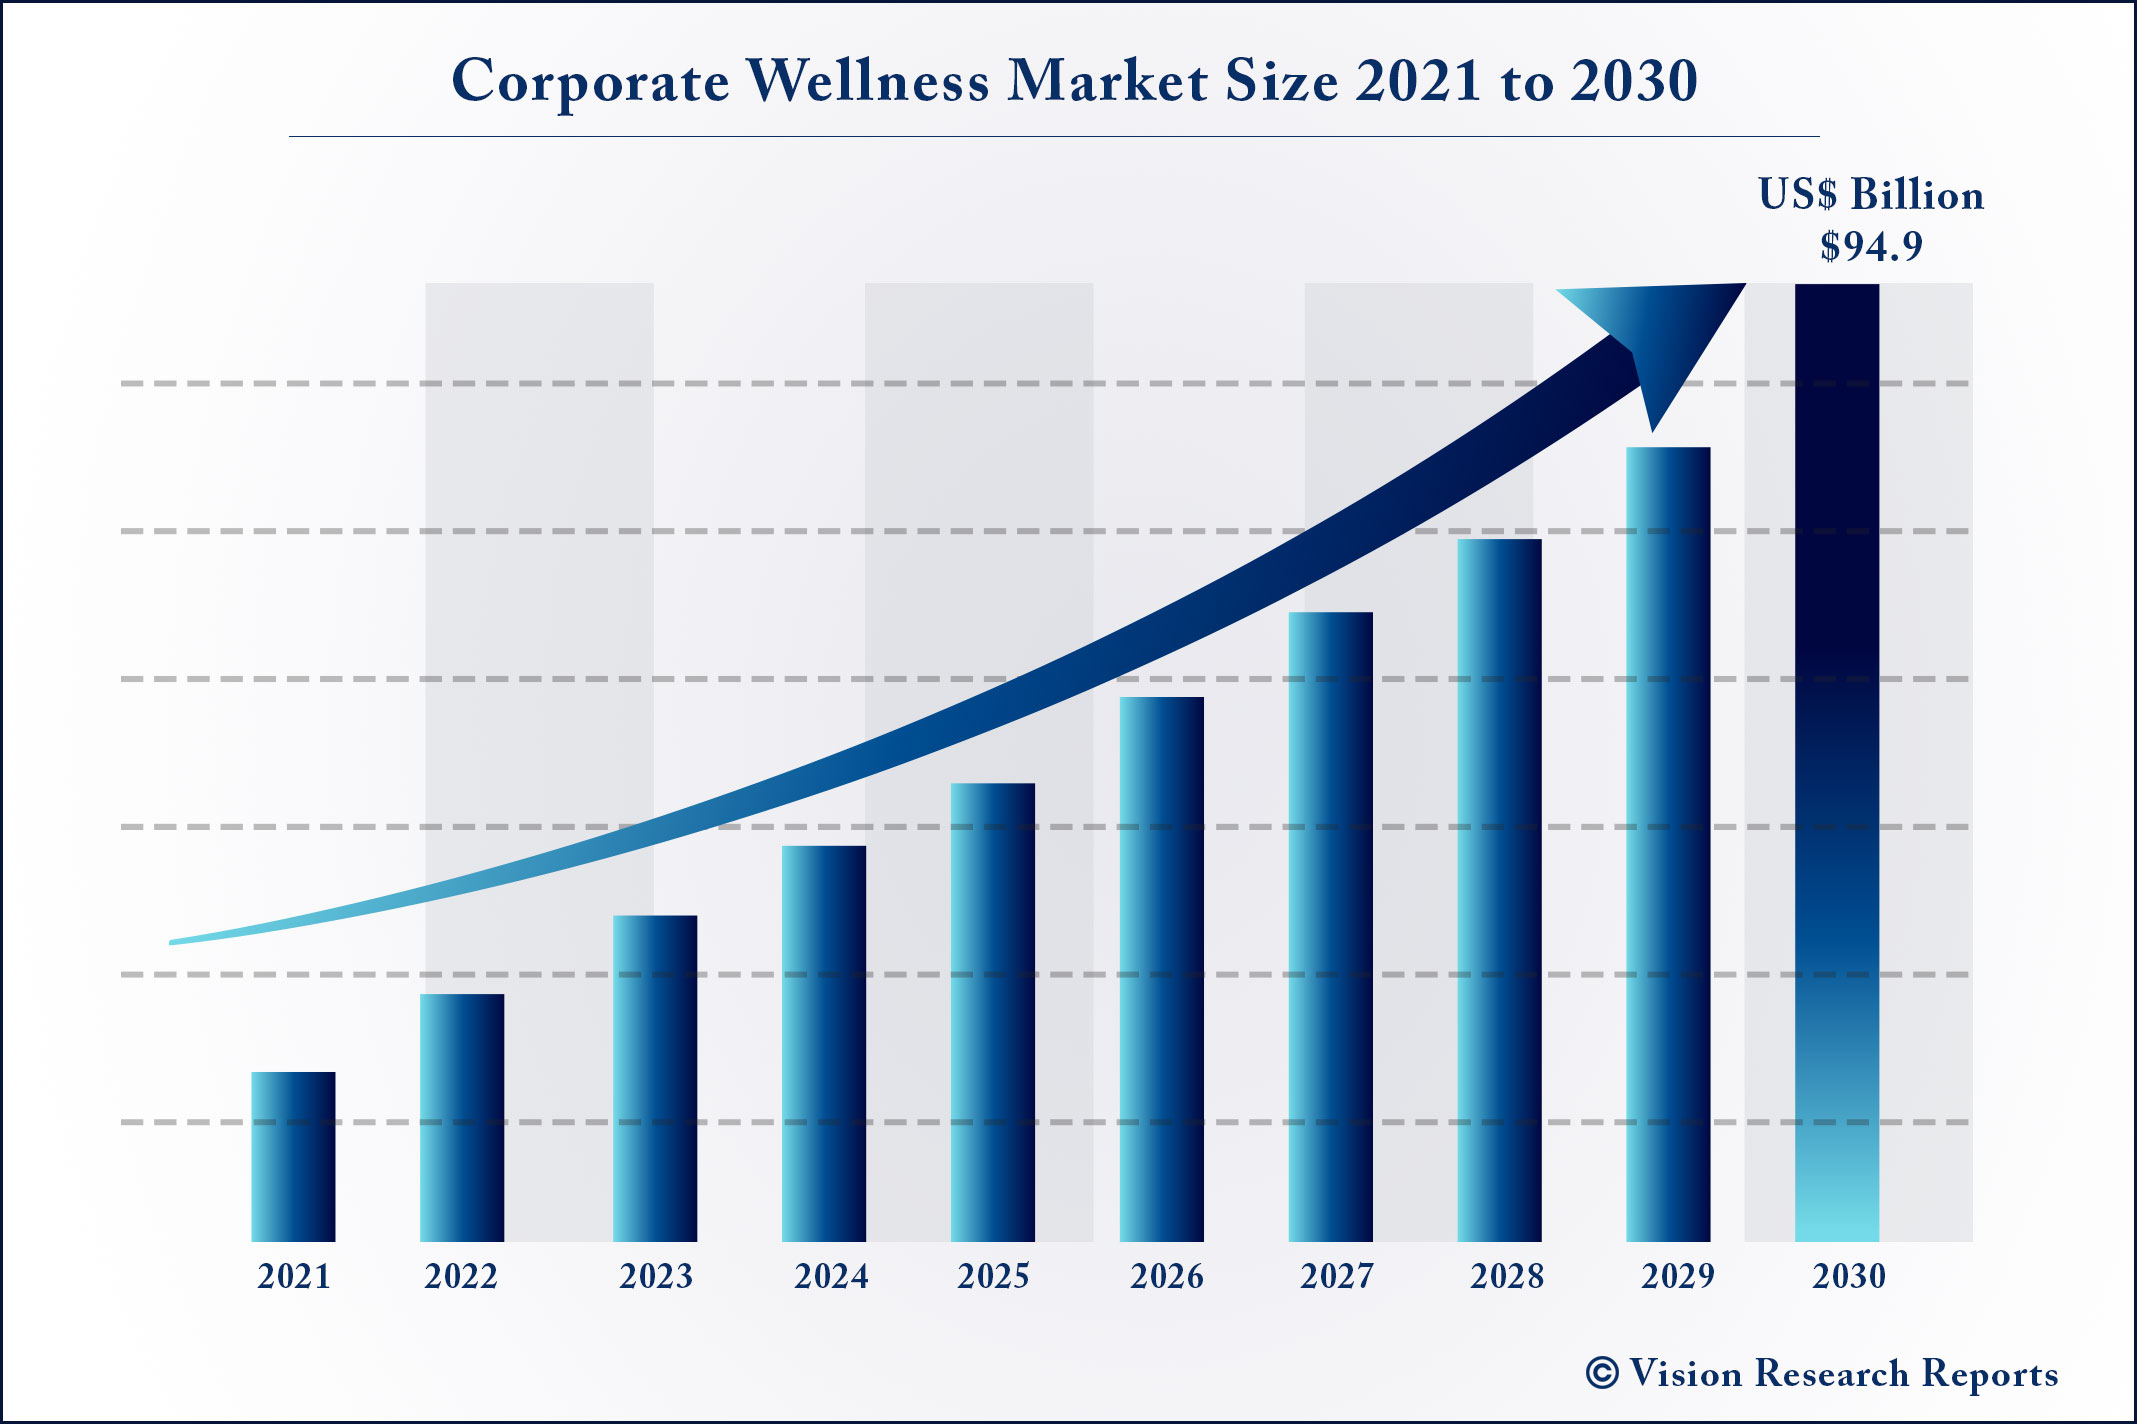 Corporate Wellness Market Size 2021 to 2030